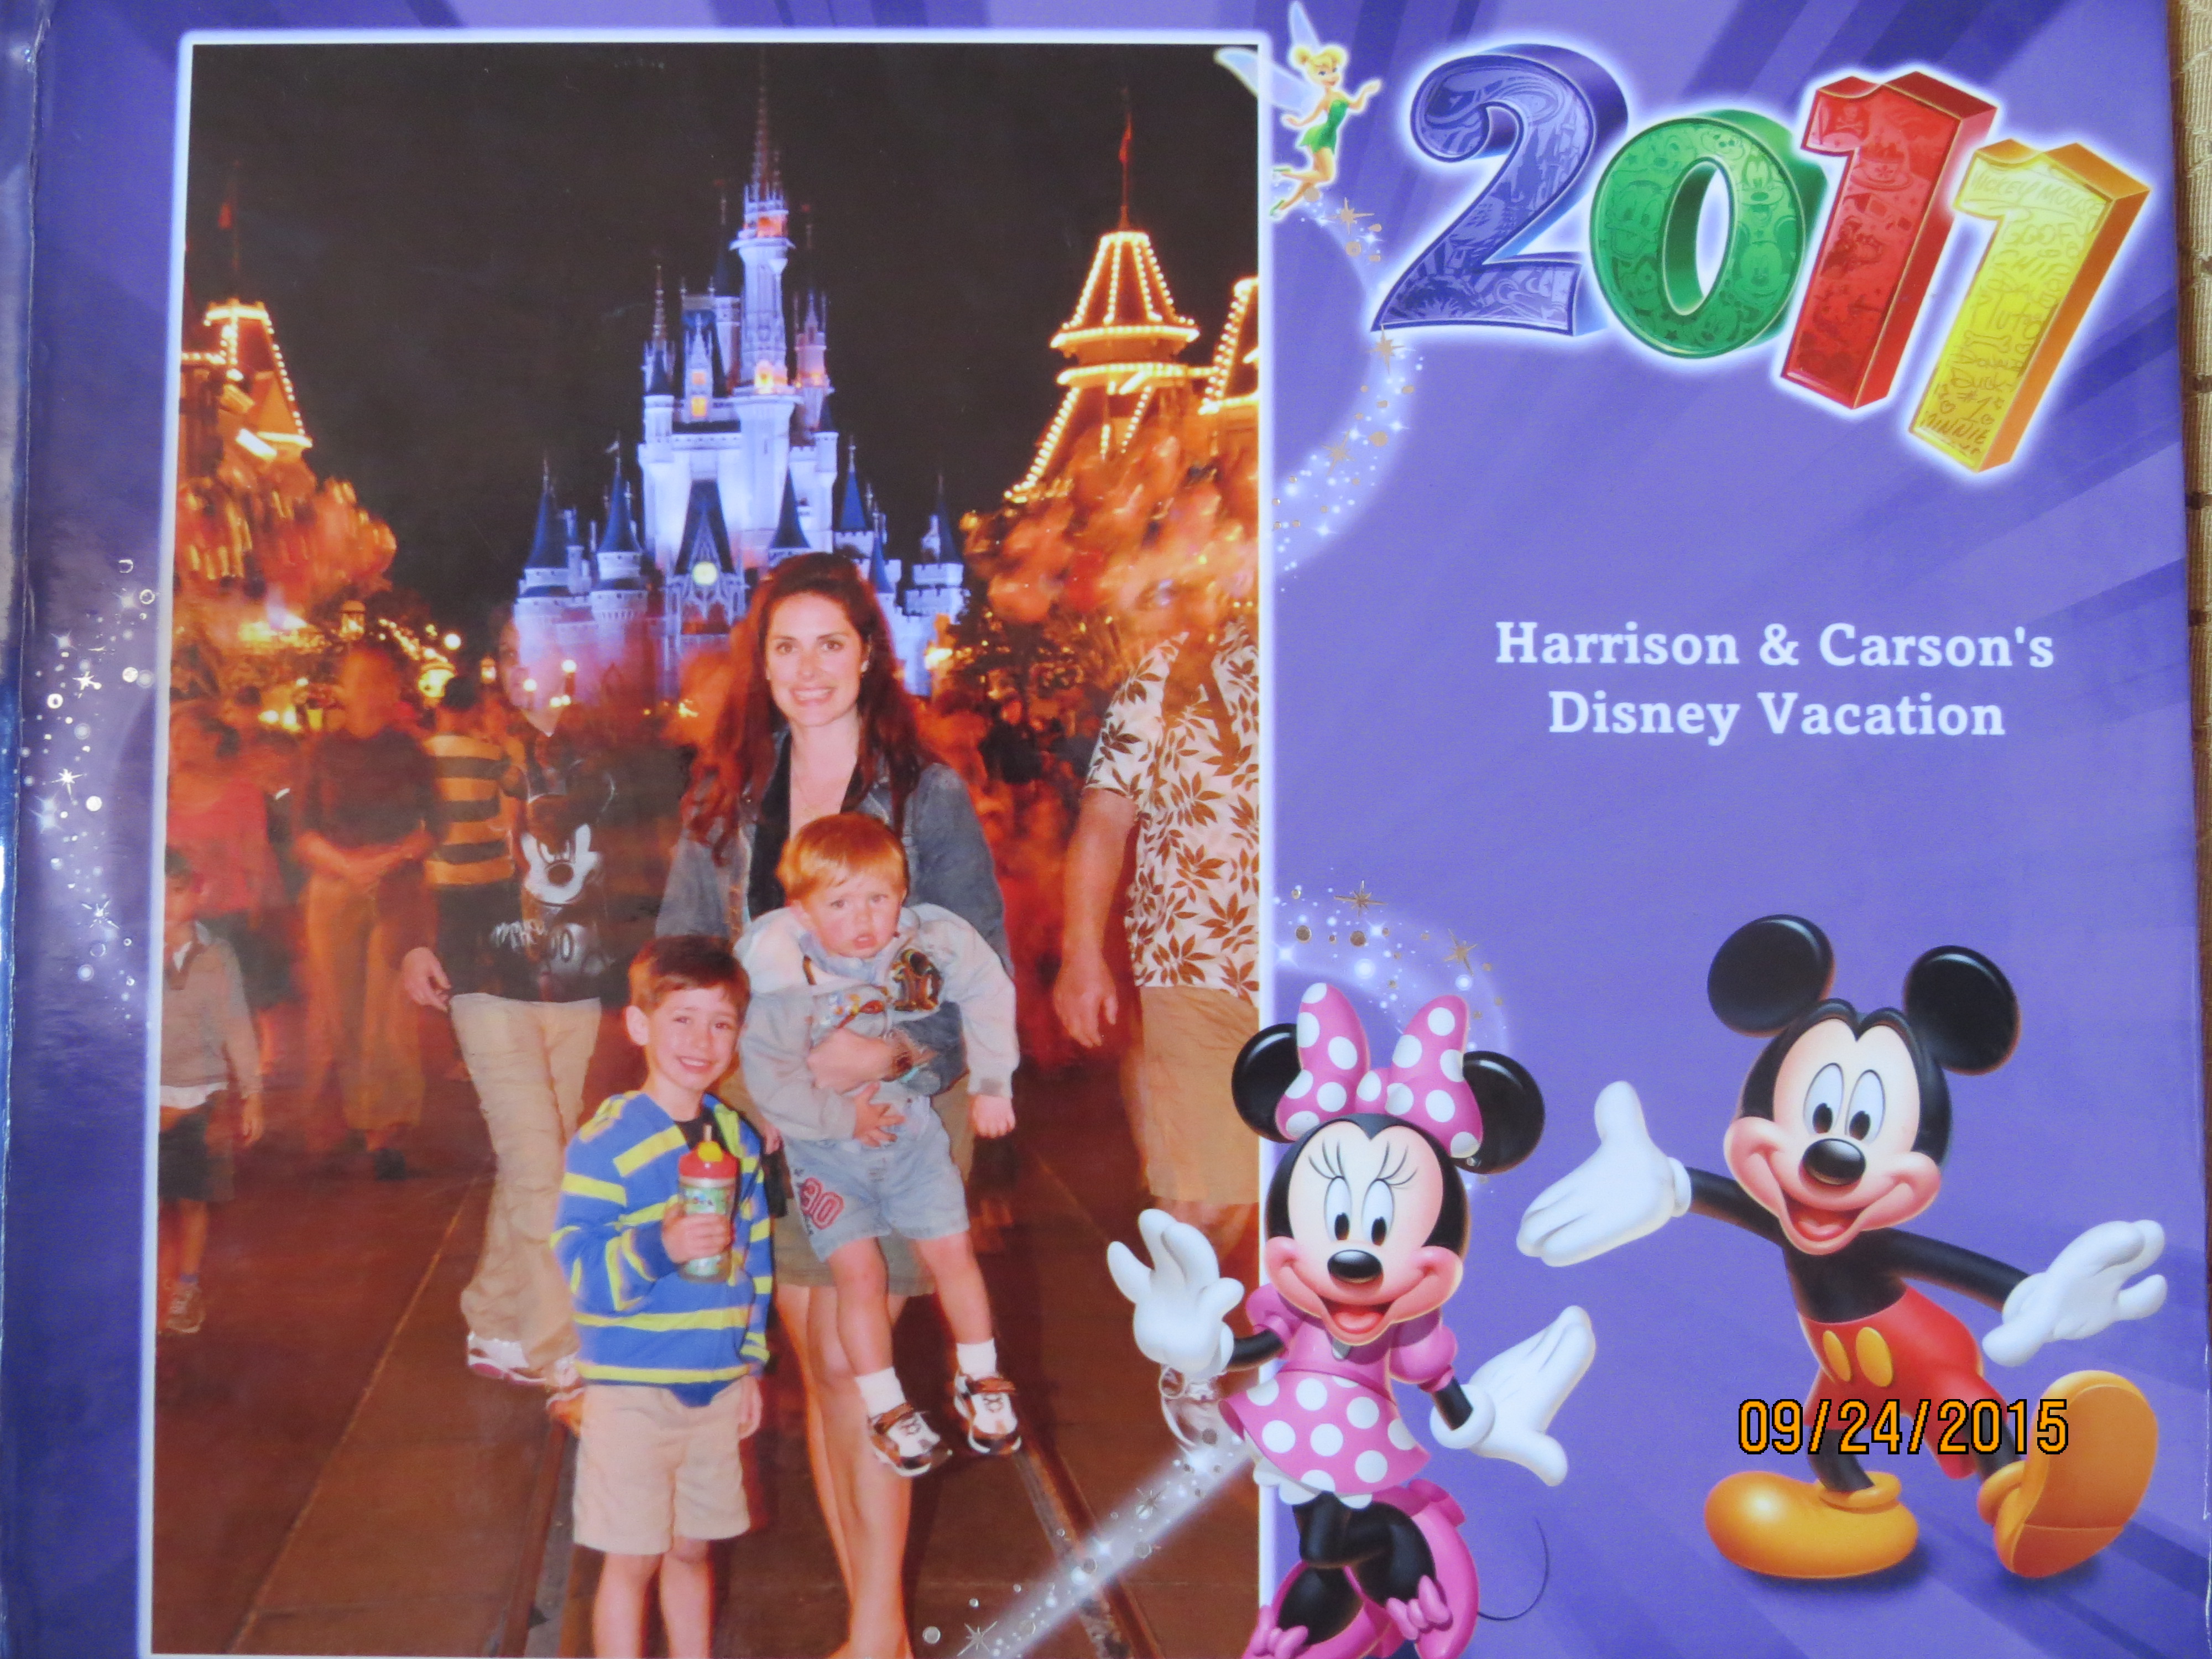 Personalize your memories with a Disney Photo Book